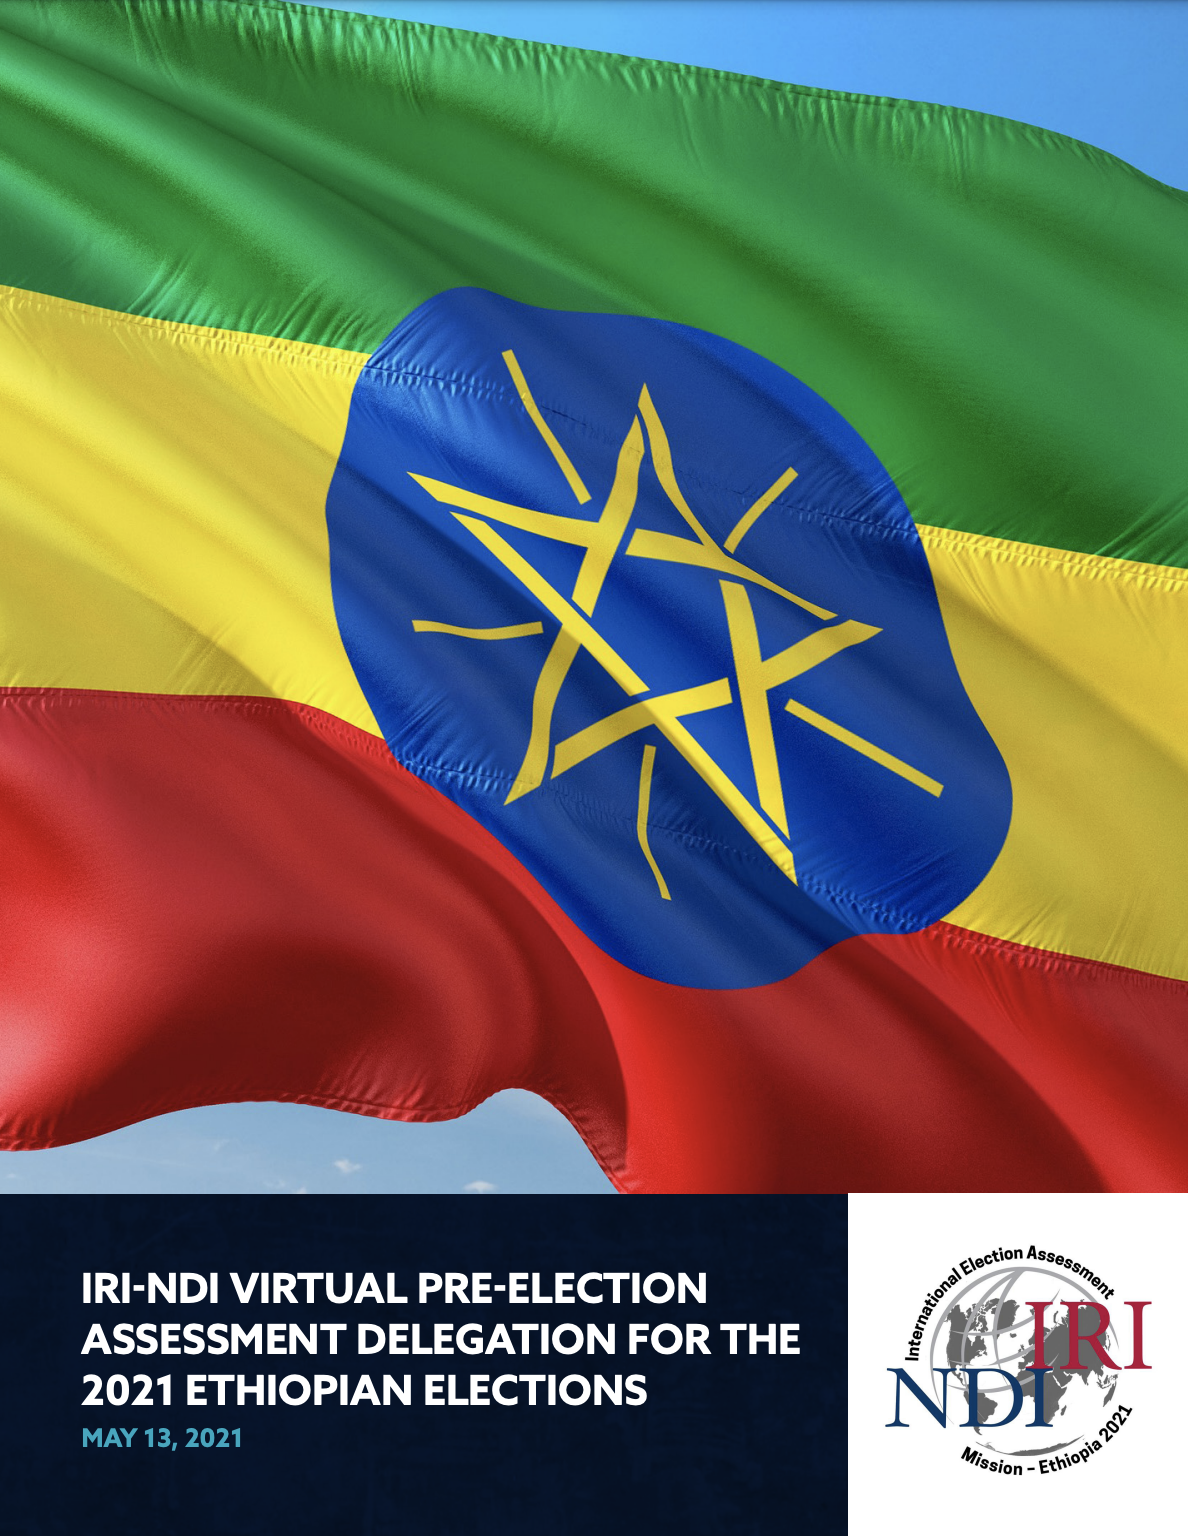 IRI-NDI VIRTUAL PRE-ELECTION ASSESSMENT DELEGATION FOR THE 2021 ETHIOPIAN ELECTIONS